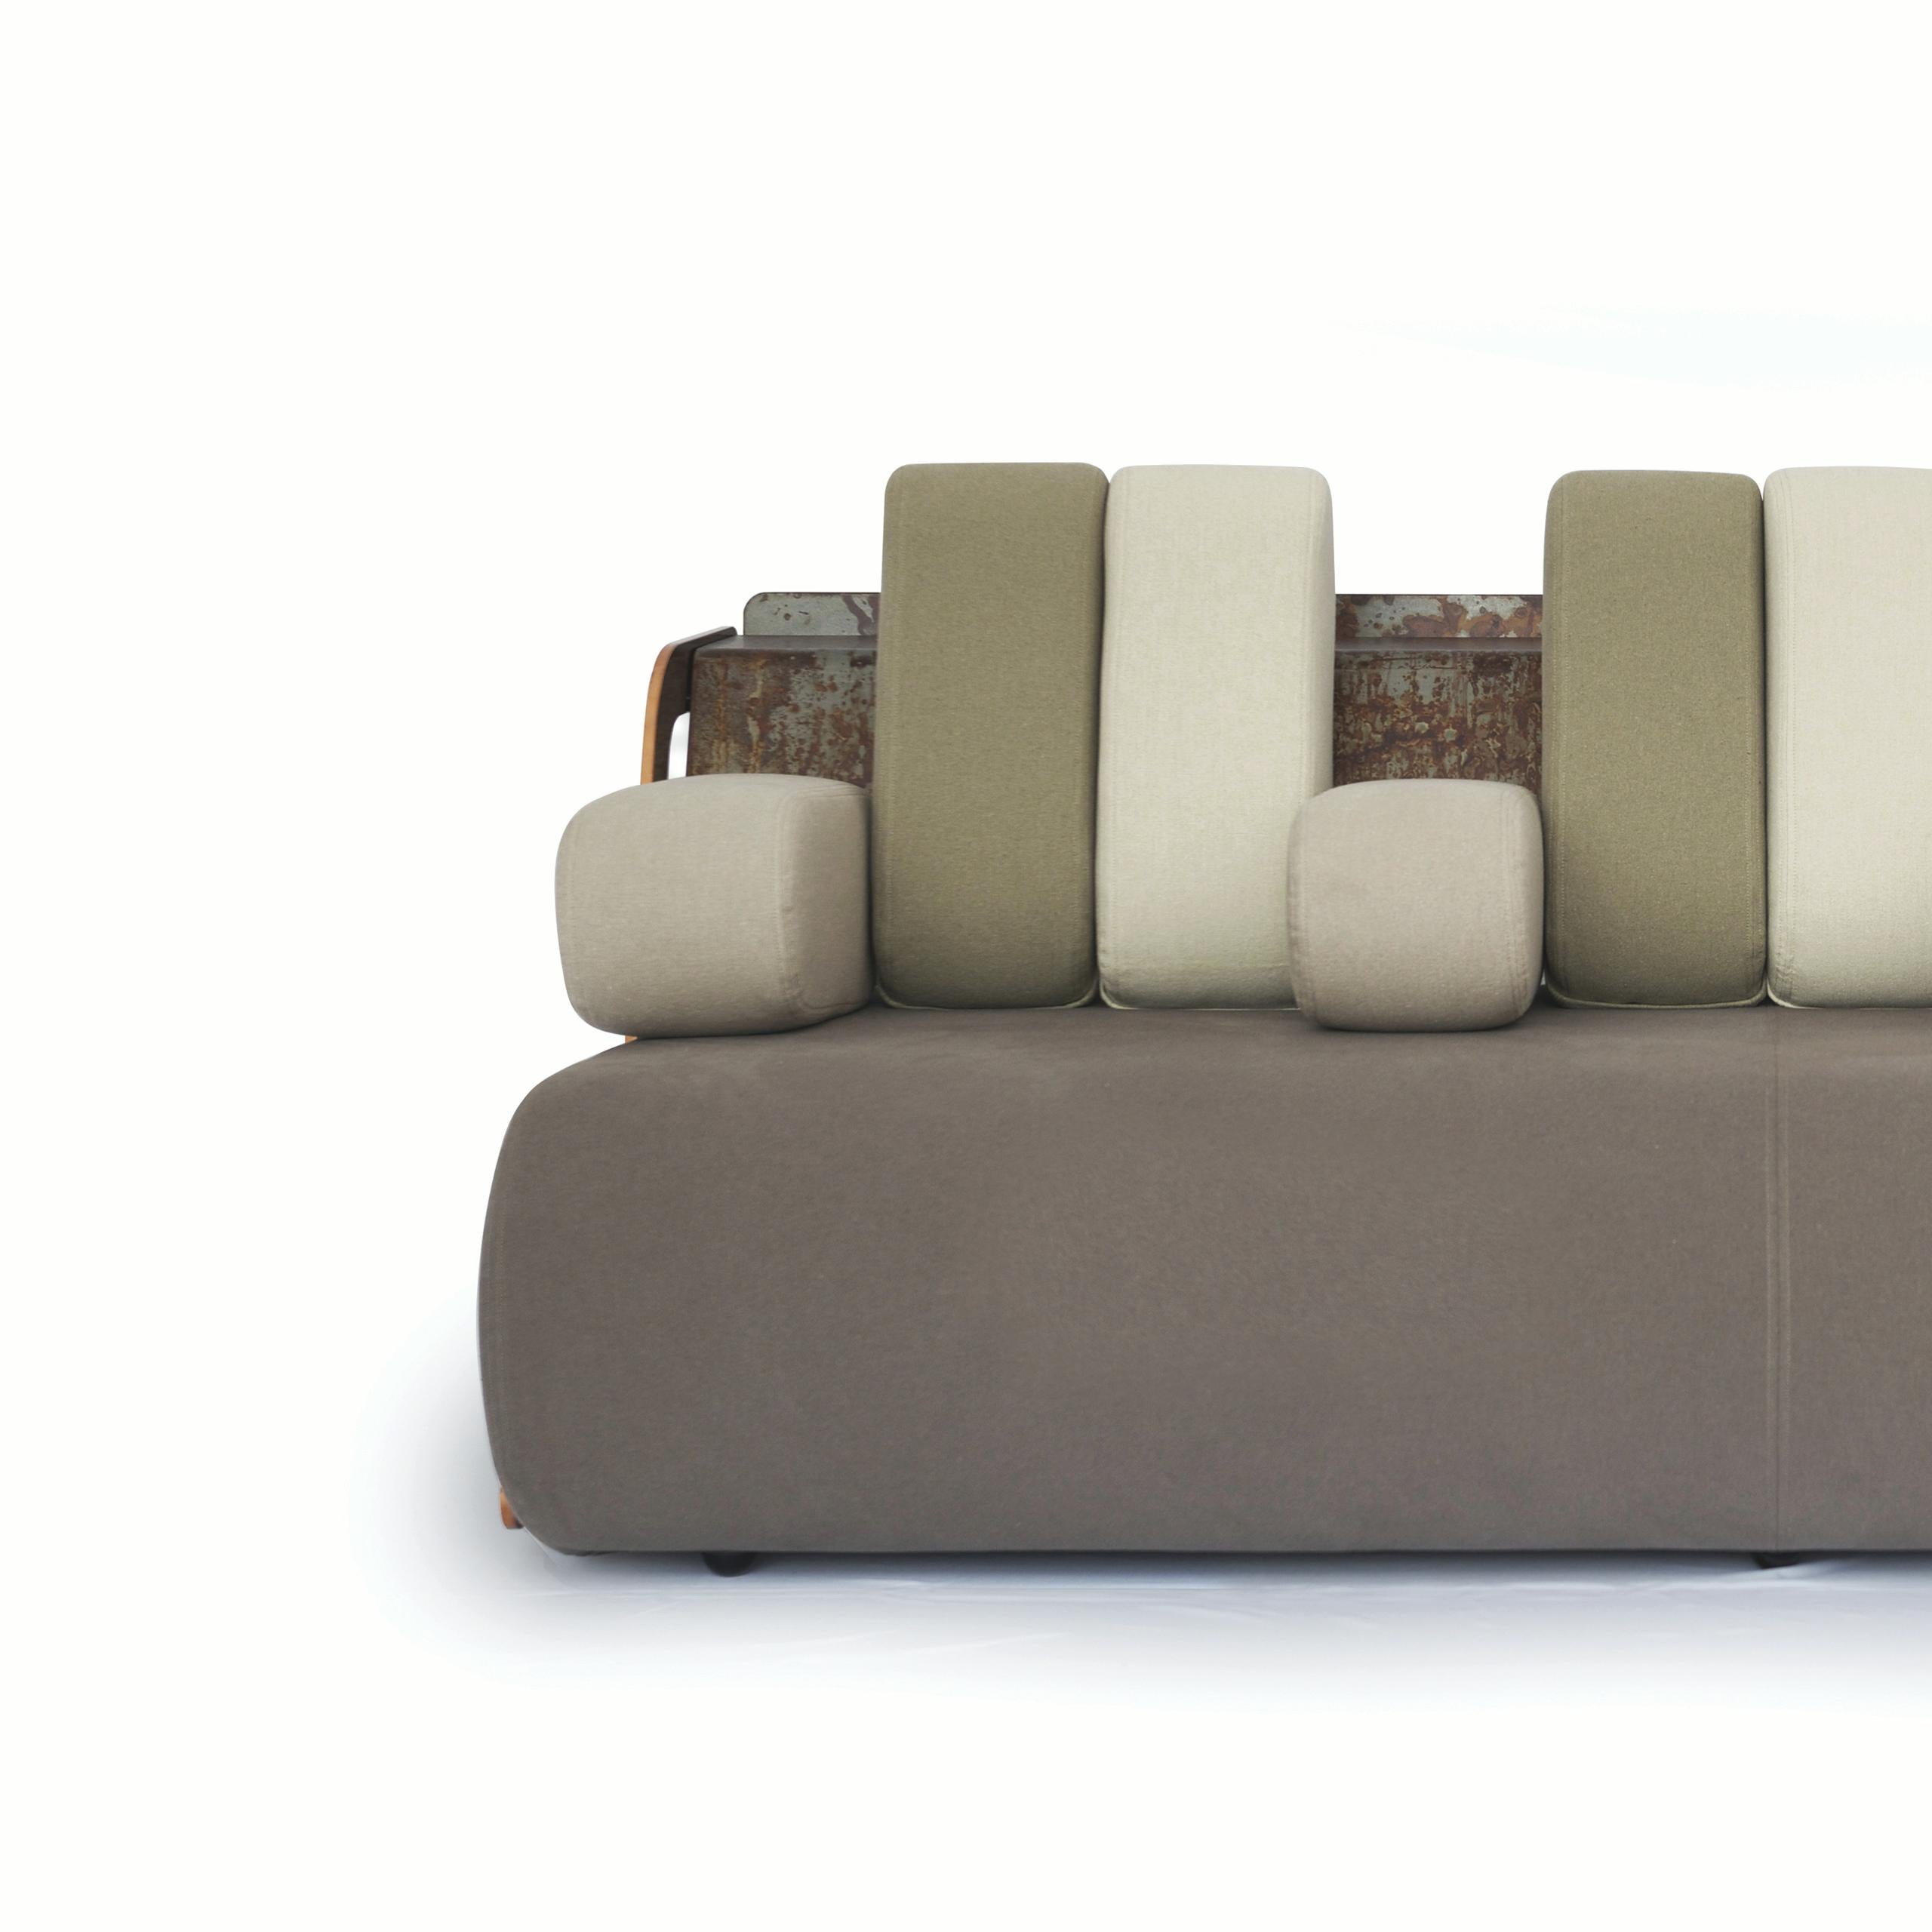 Italian Fair Play Sofa, Cotton Upholstery, Copper and Iron Structure by Mario Milana For Sale